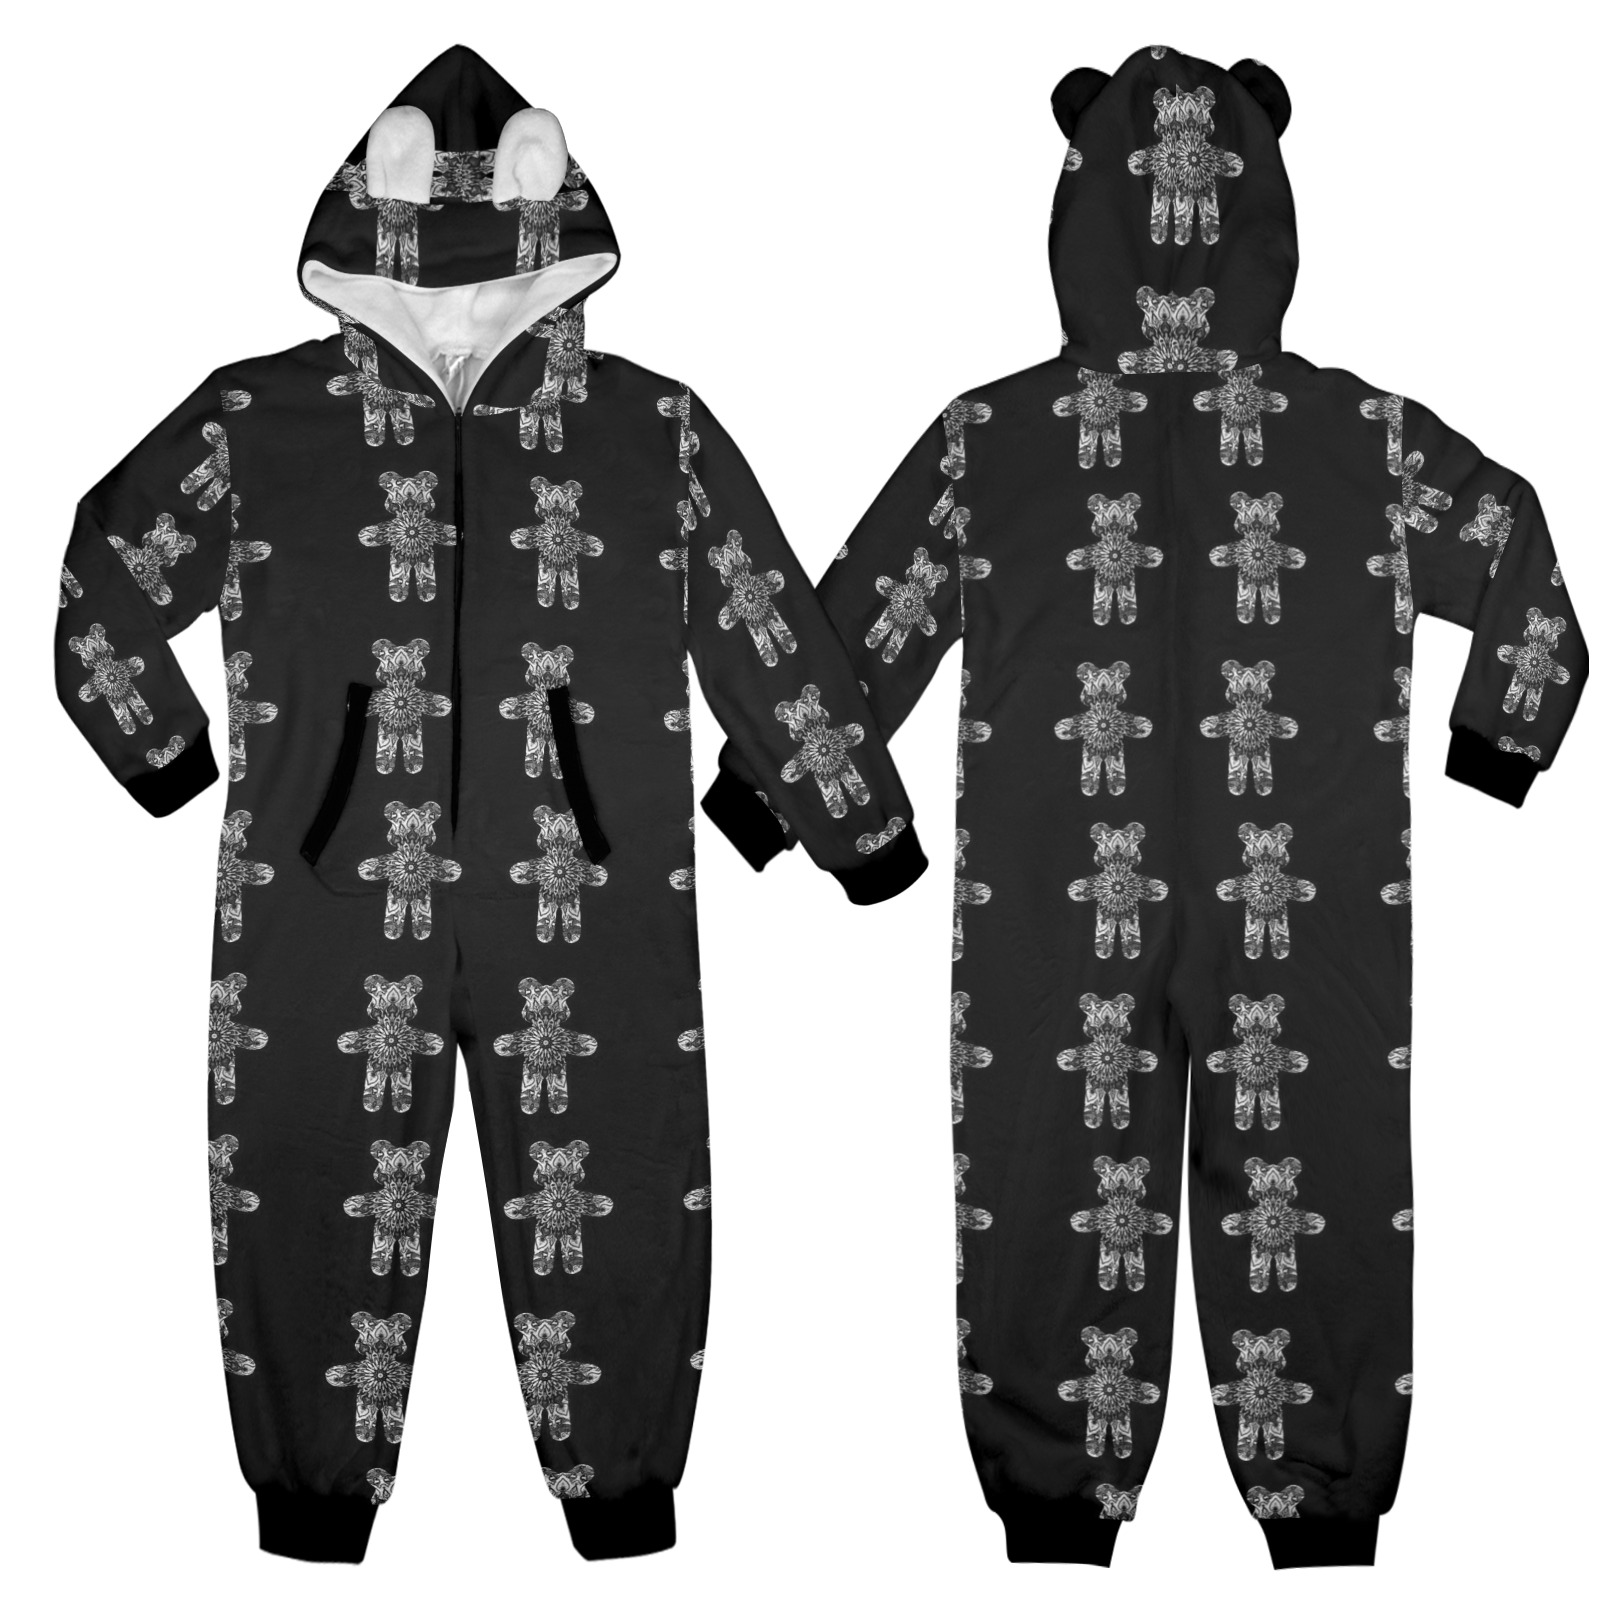 nounours 1g One-Piece Zip Up Hooded Pajamas for Big Kids